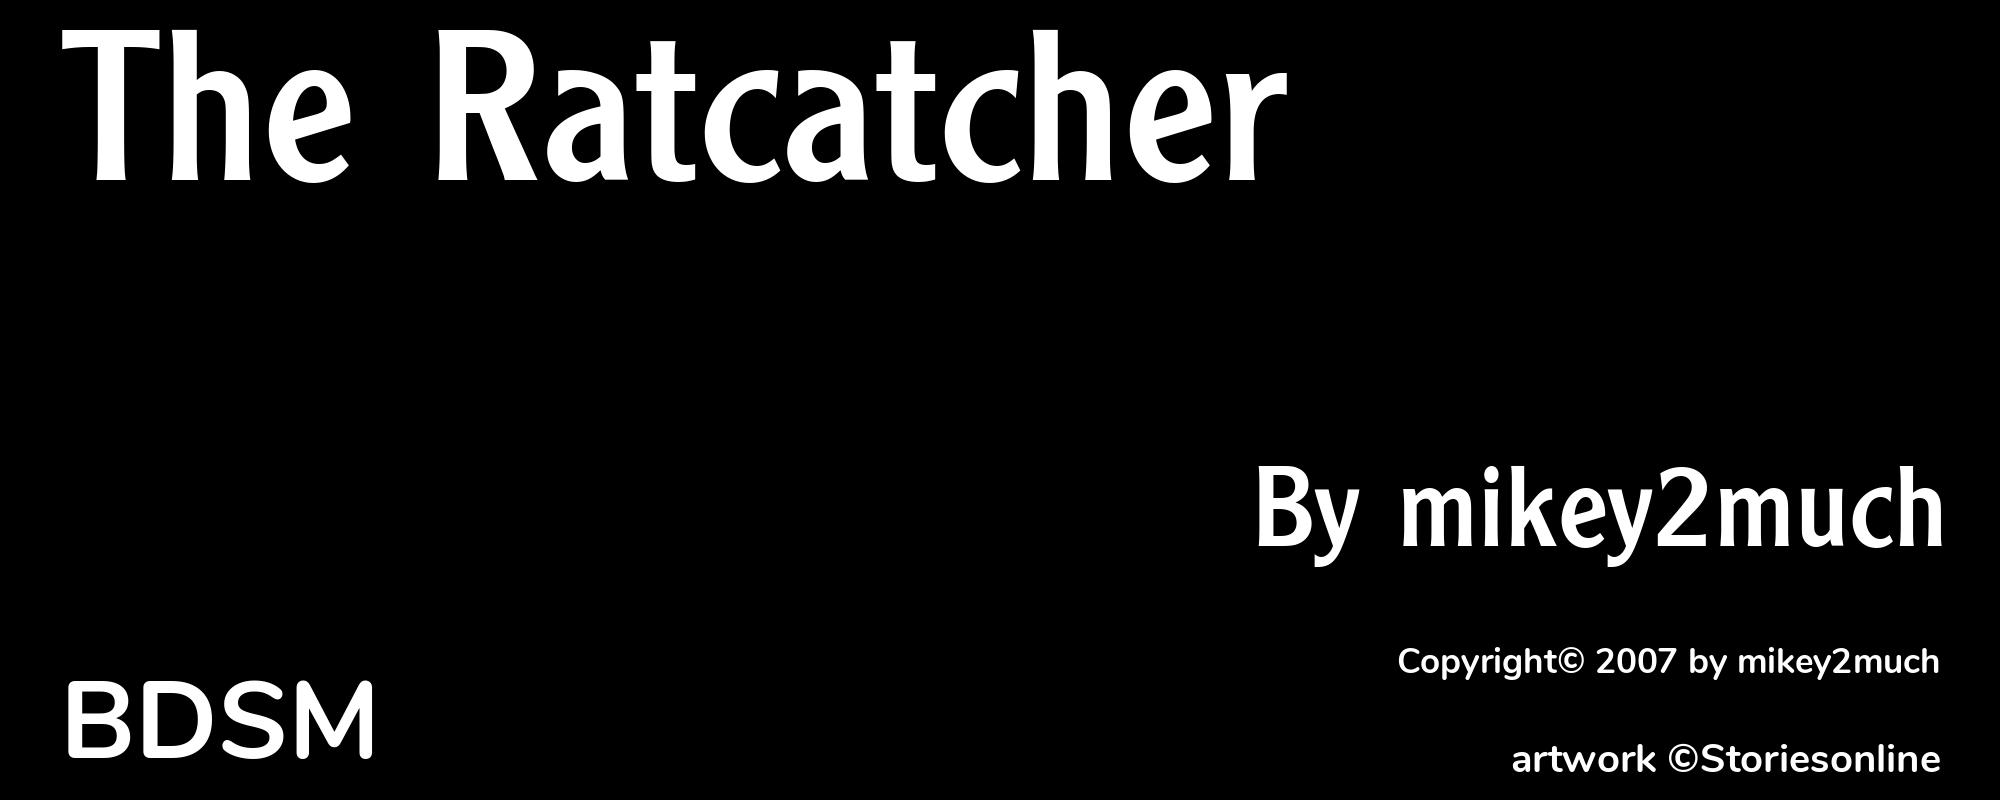 The Ratcatcher - Cover